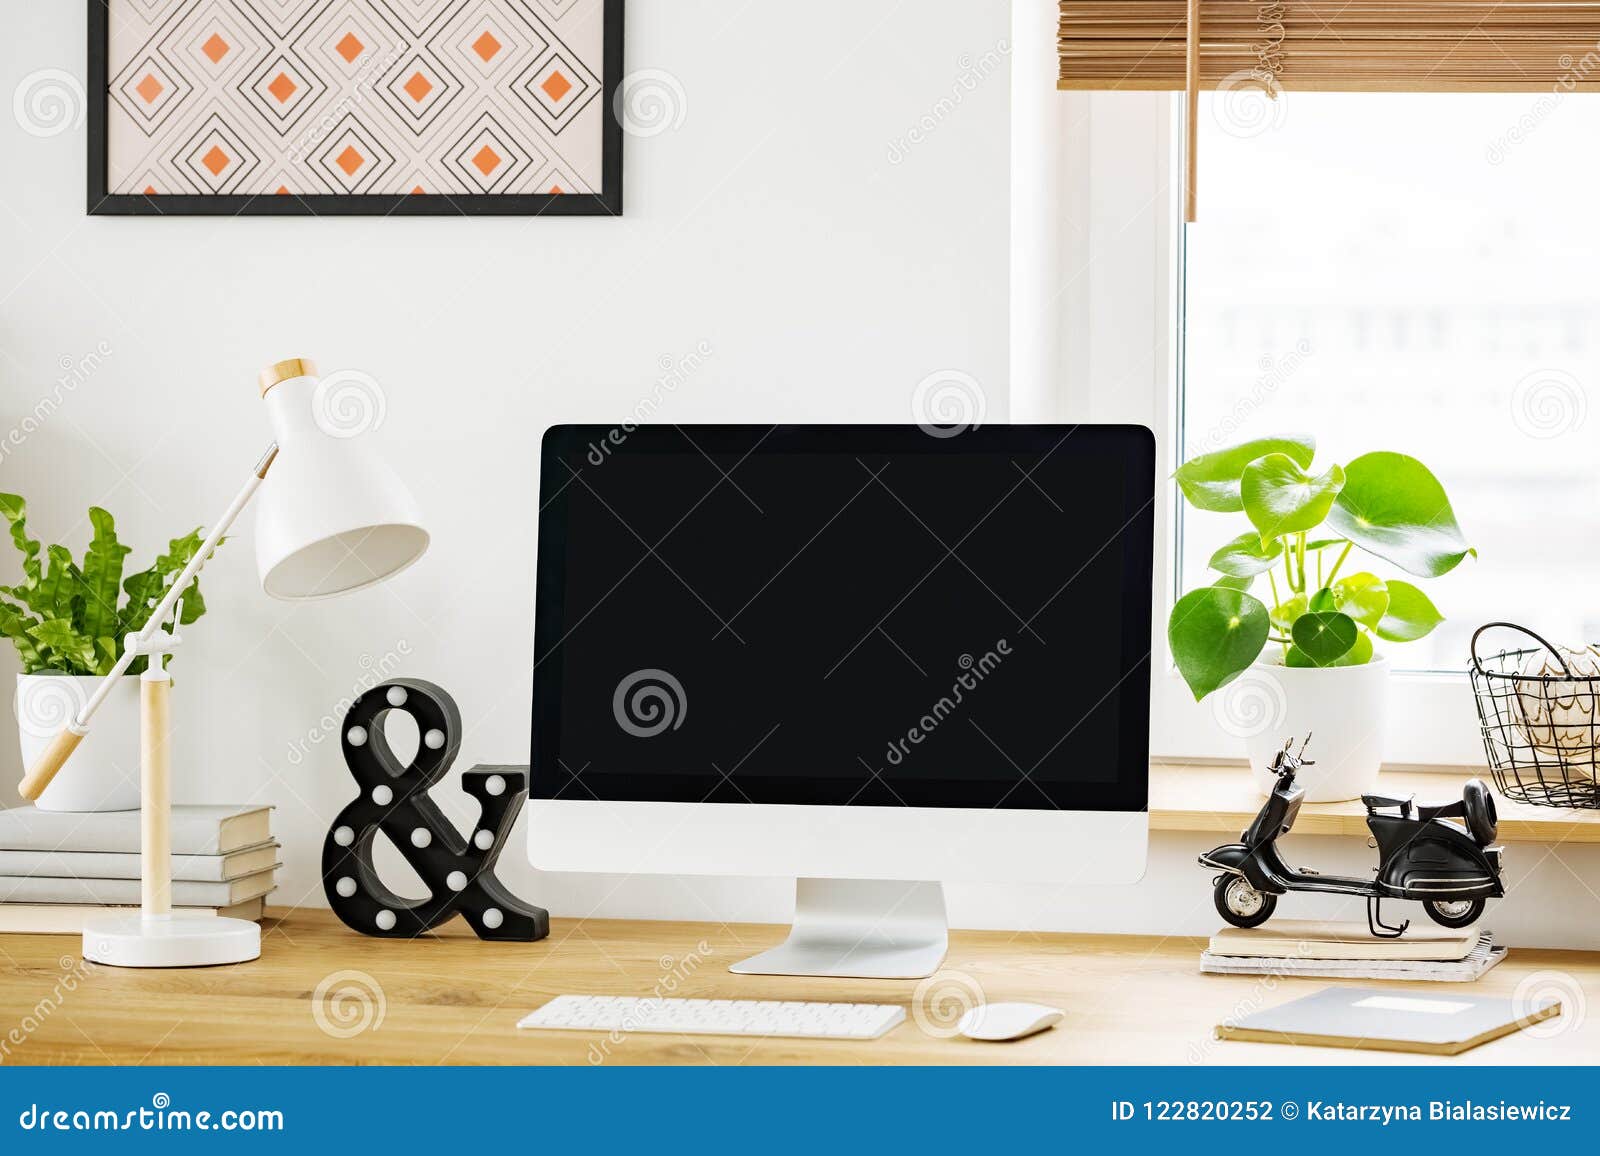 white lamp next to computer desktop on wooden desk in home office interior with plant. real photo